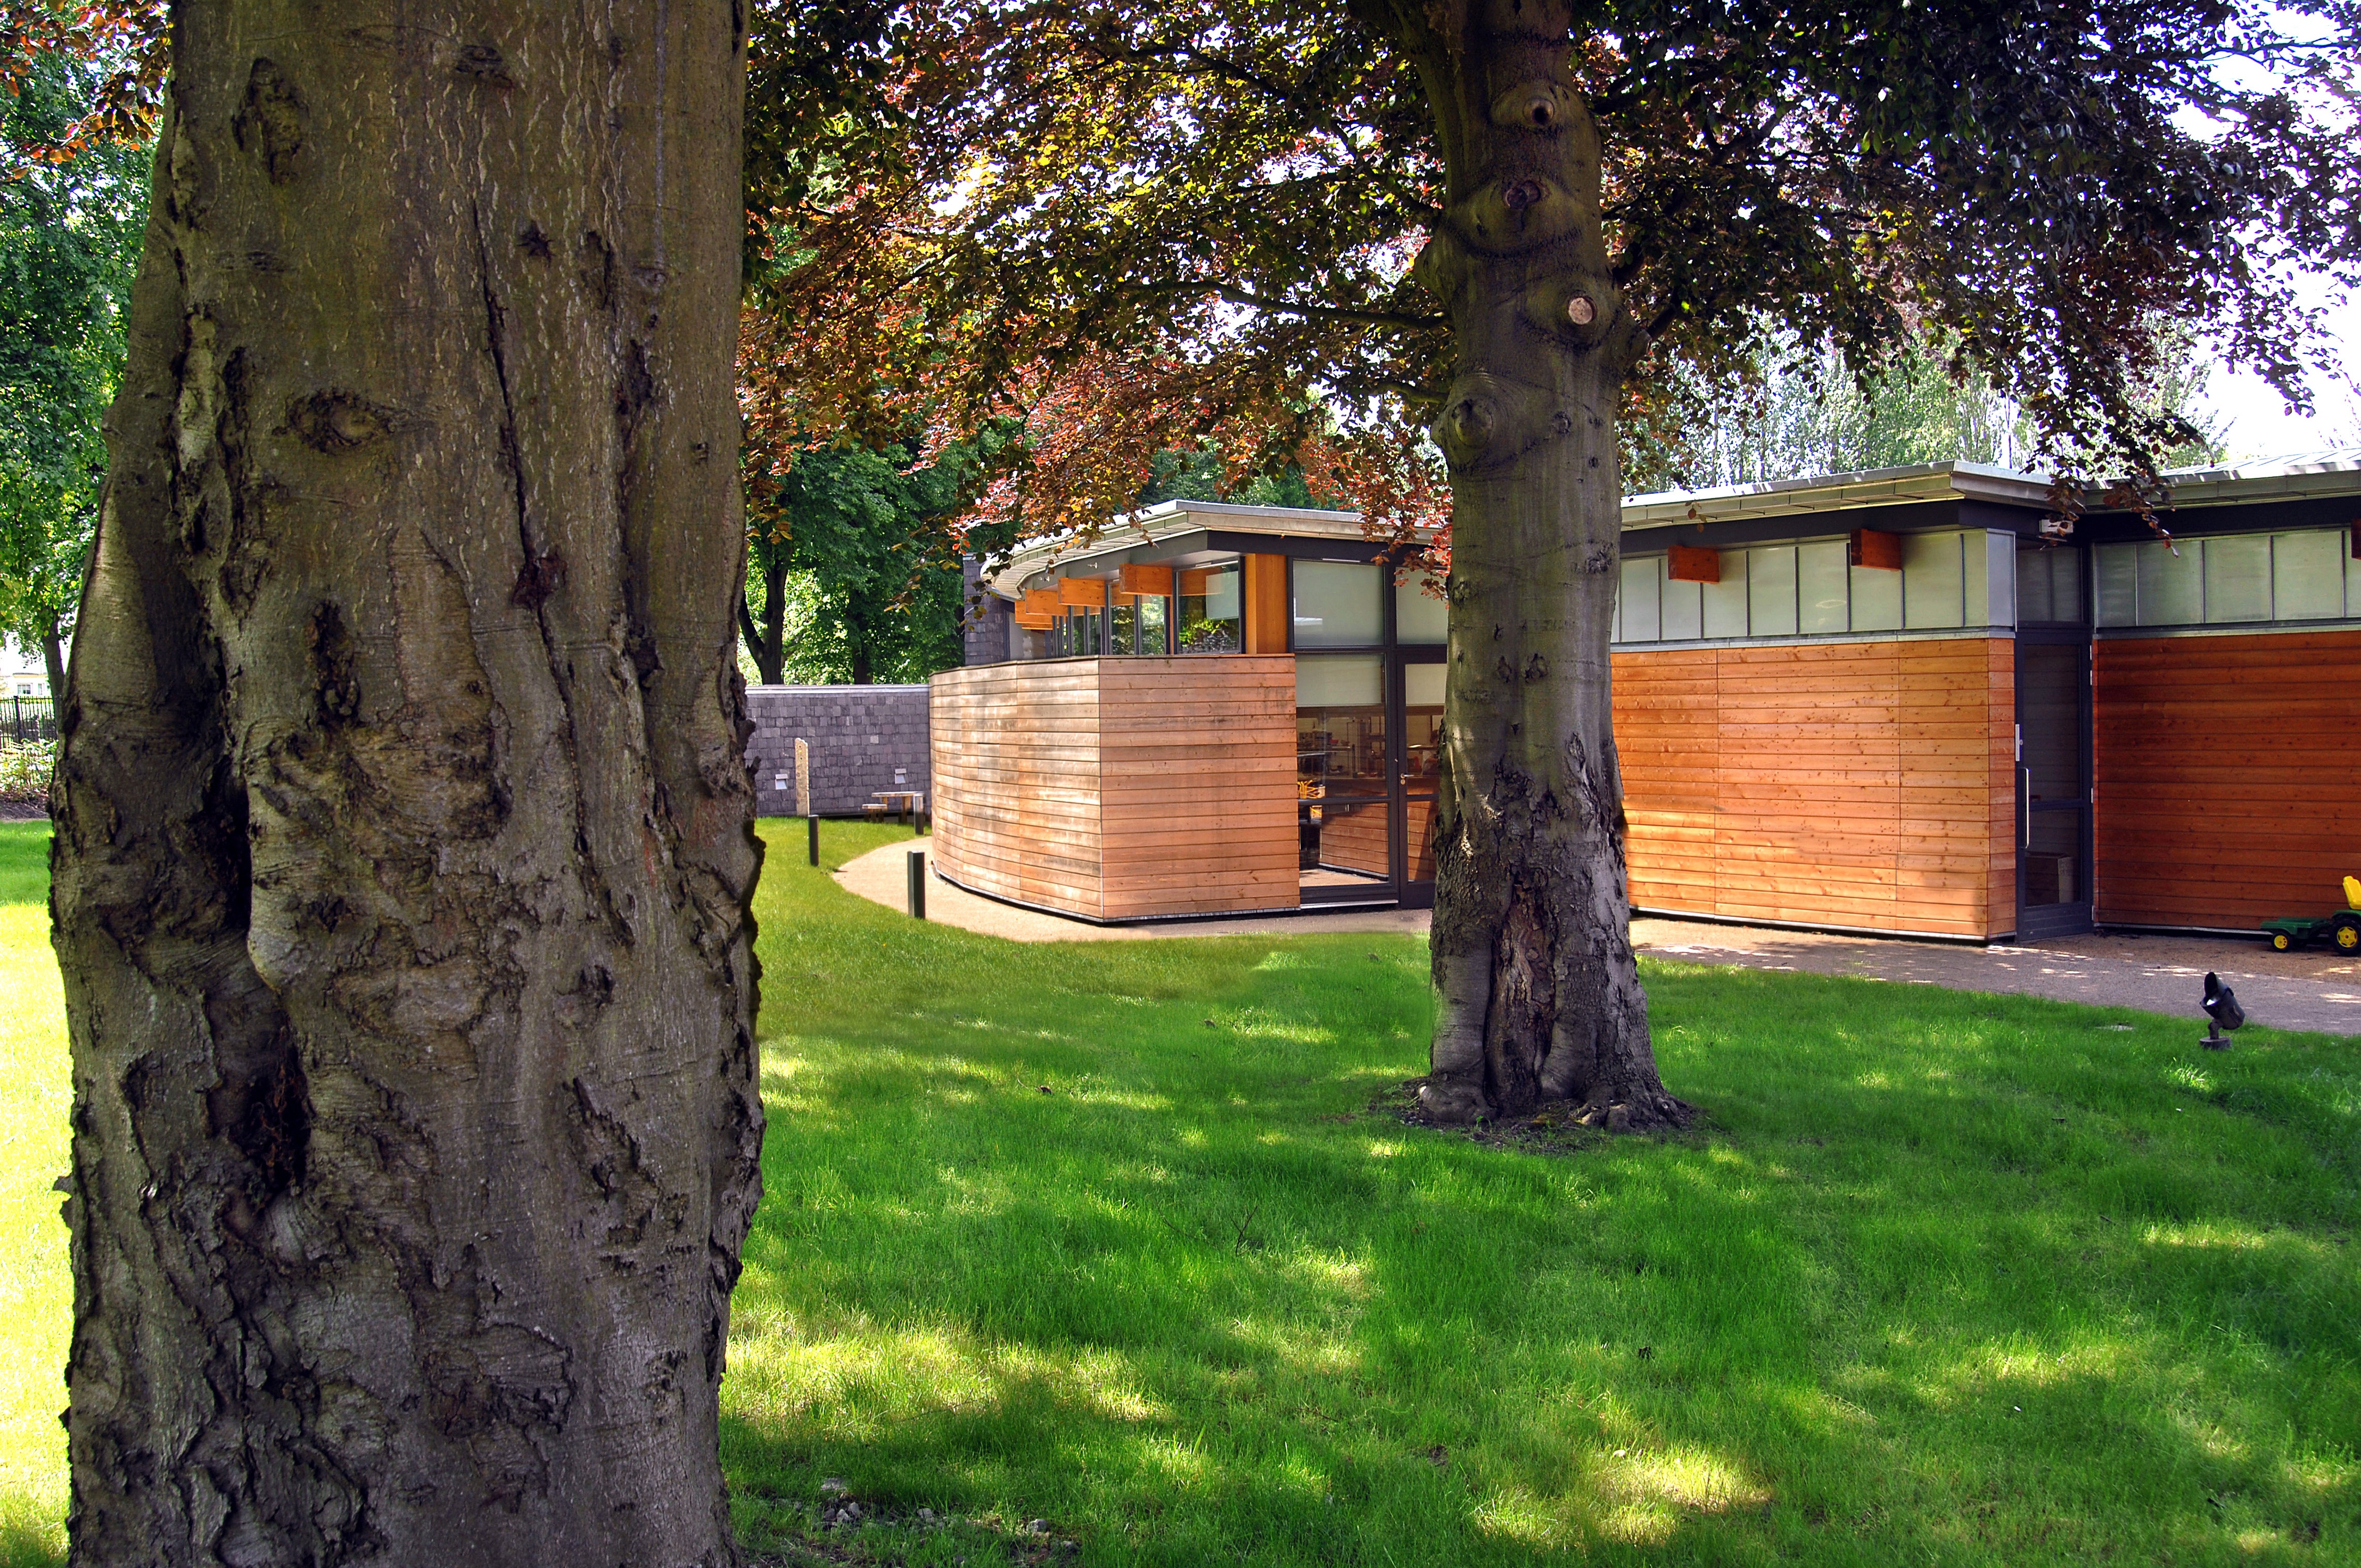 Exterior view of school showcasing two large trees that sit near the building